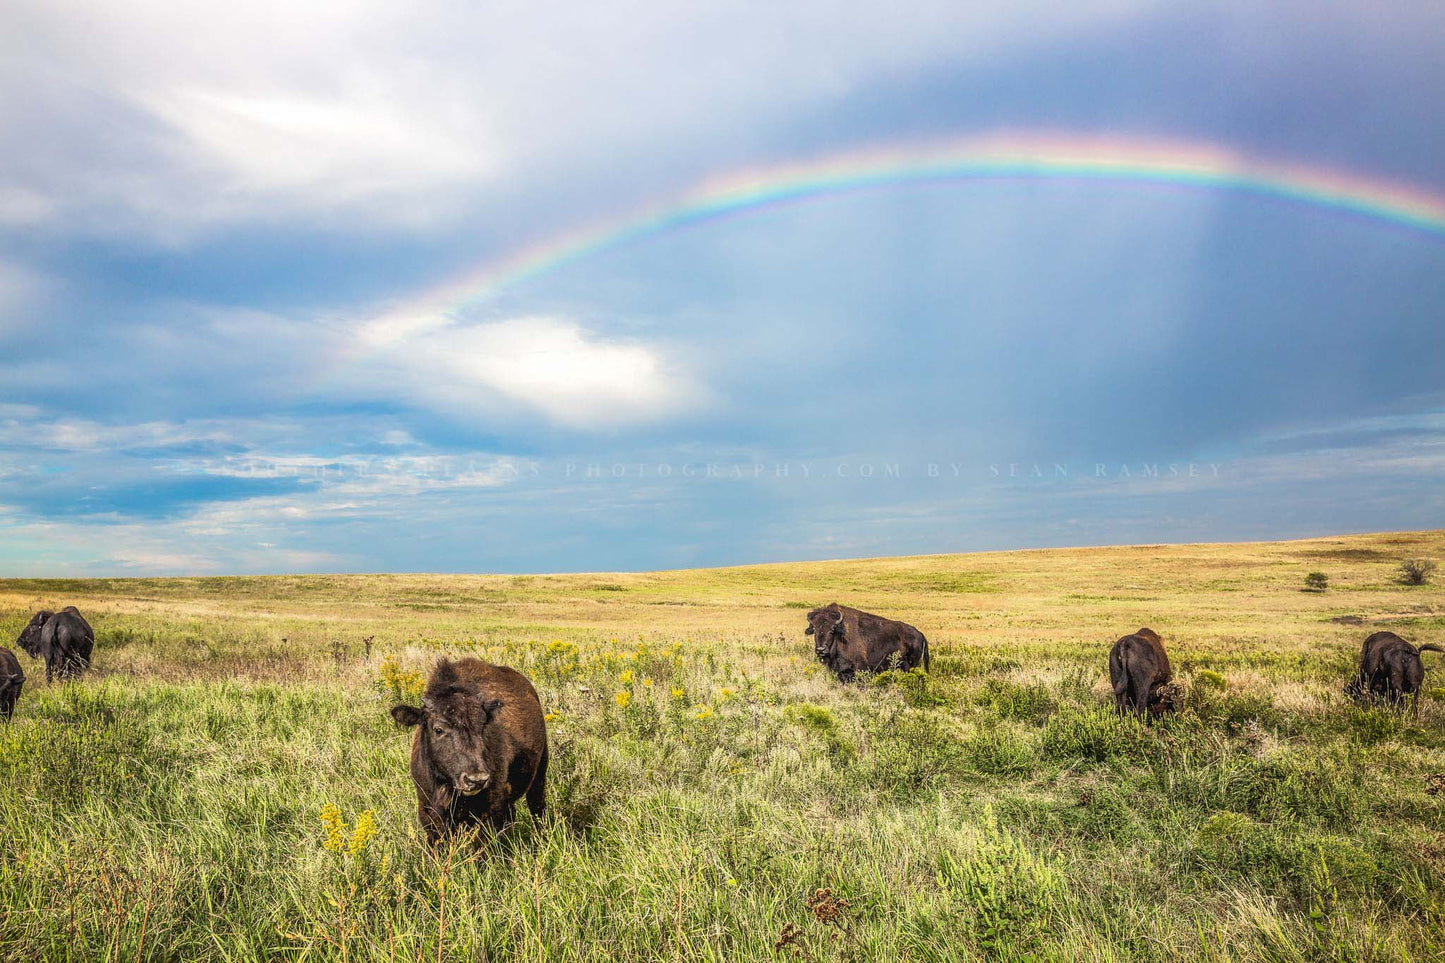 Western photography print of a buffalo calf  and bison herd under a rainbow on the Tallgrass Prairie near Pawhuska, Oklahoma by Sean Ramsey of Southern Plains Photography.